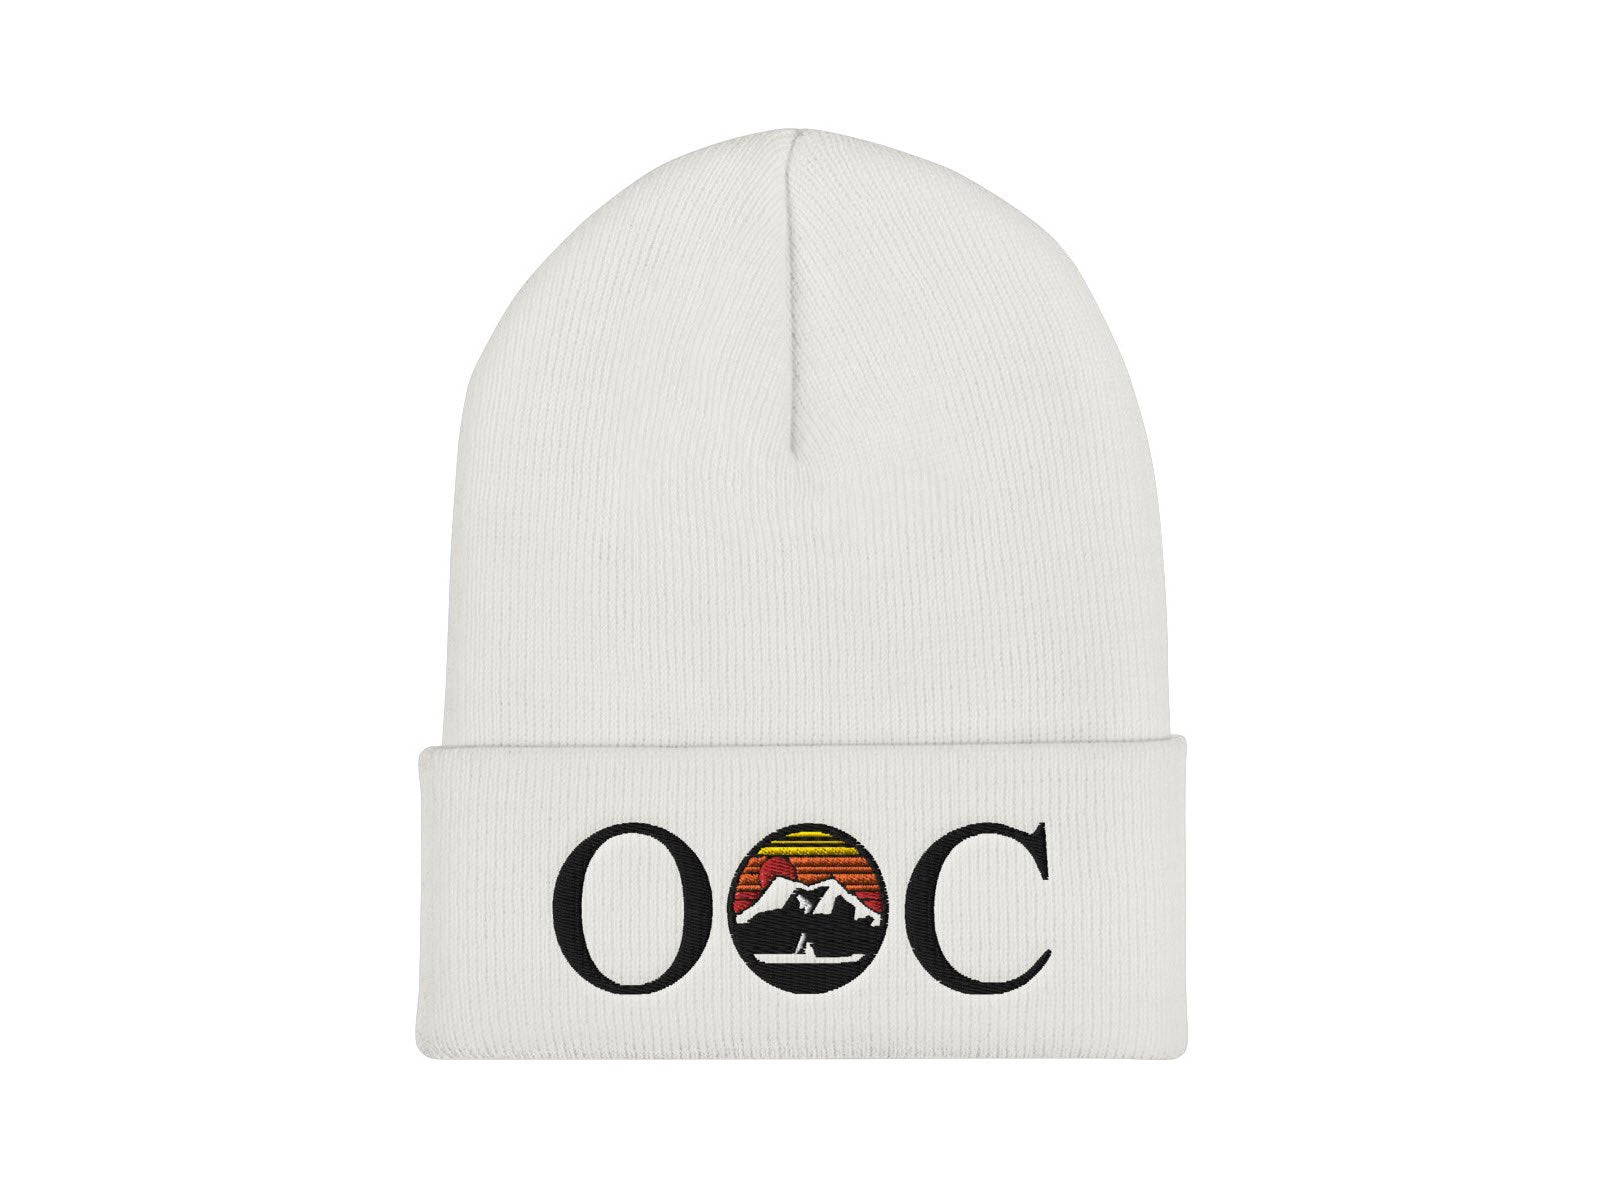 Olympic Outdoor Center OOC Logo Cuffed Beanie in White